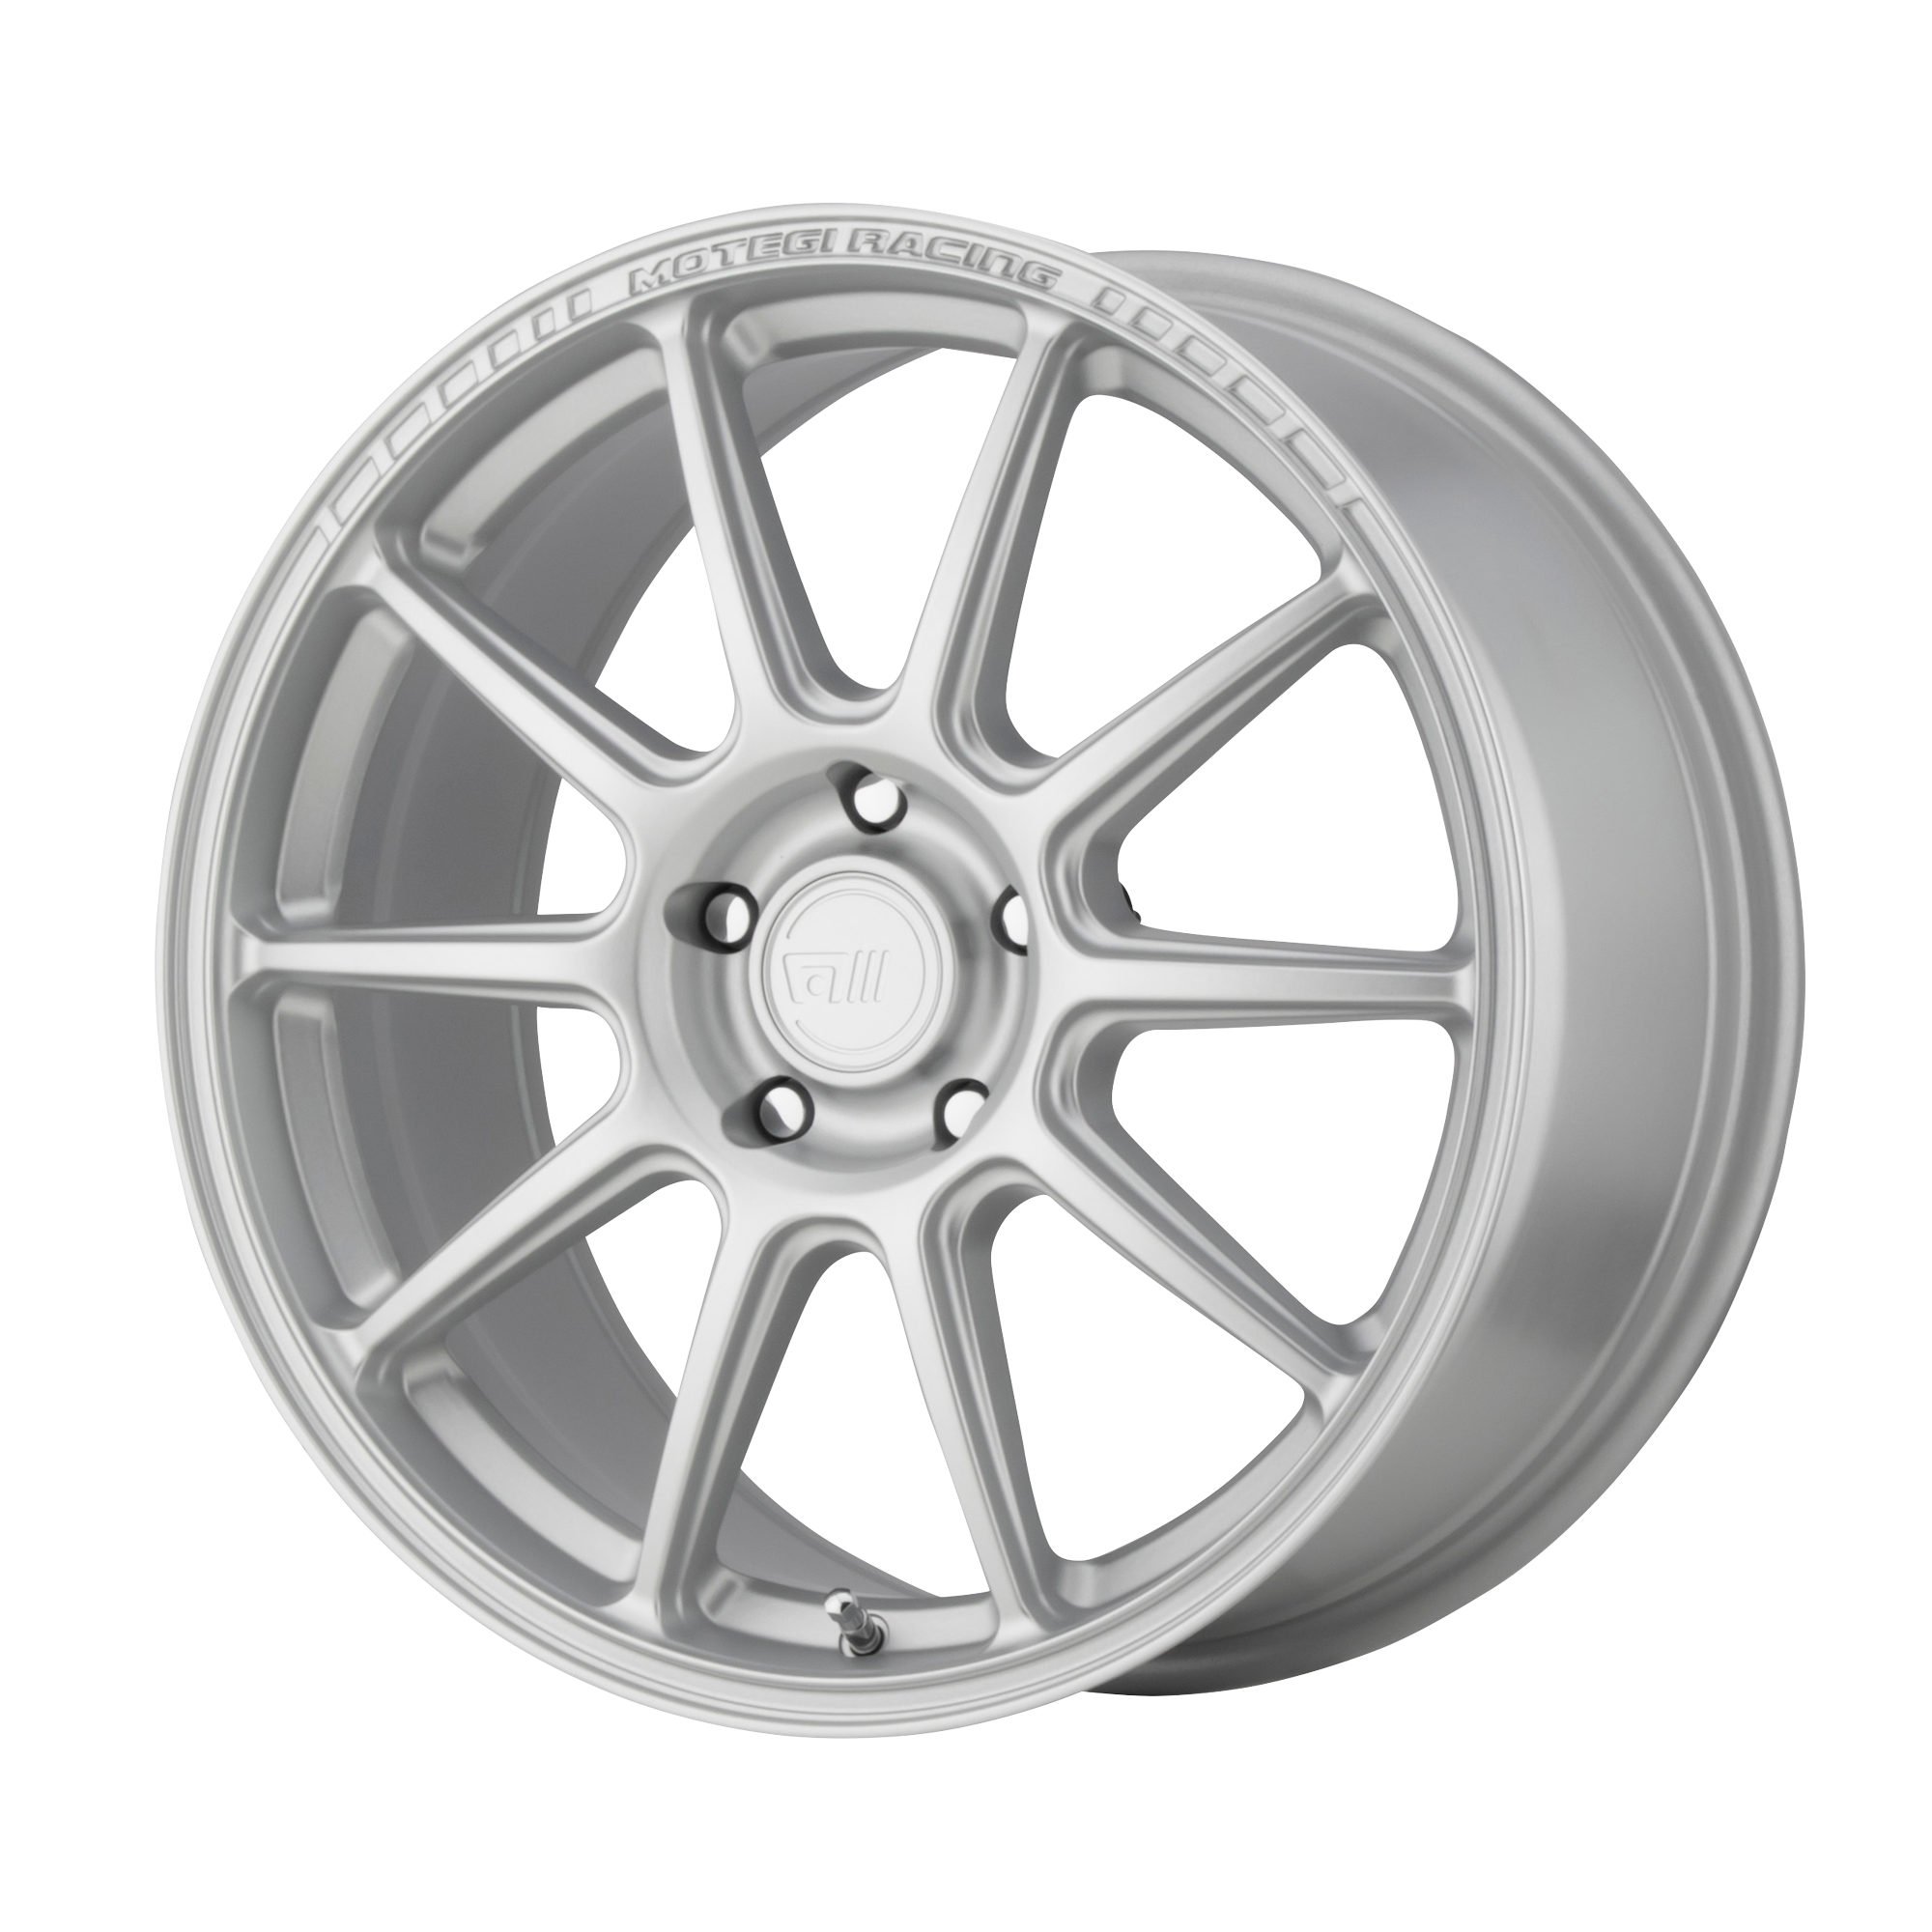 MR140 18x8.5 5x100.00 HYPER SILVER (45 mm) - Tires and Engine Performance